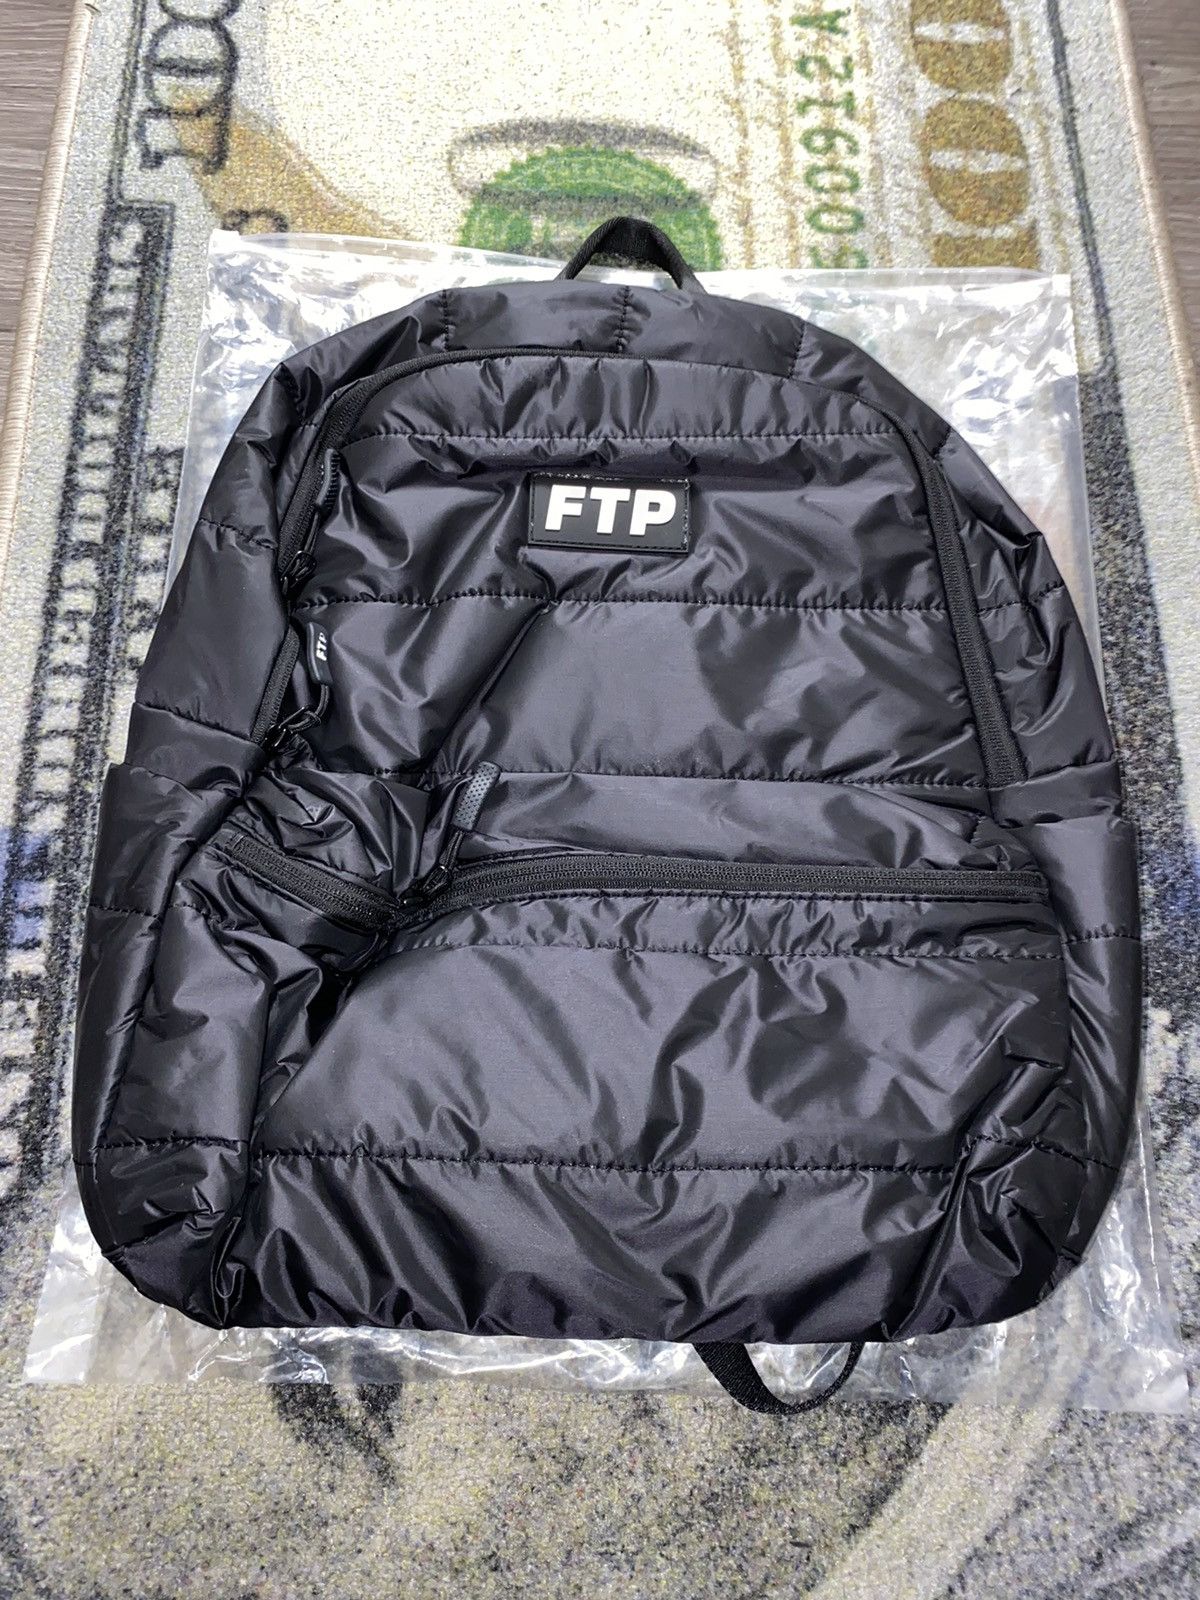 FTP backpack - バッグ